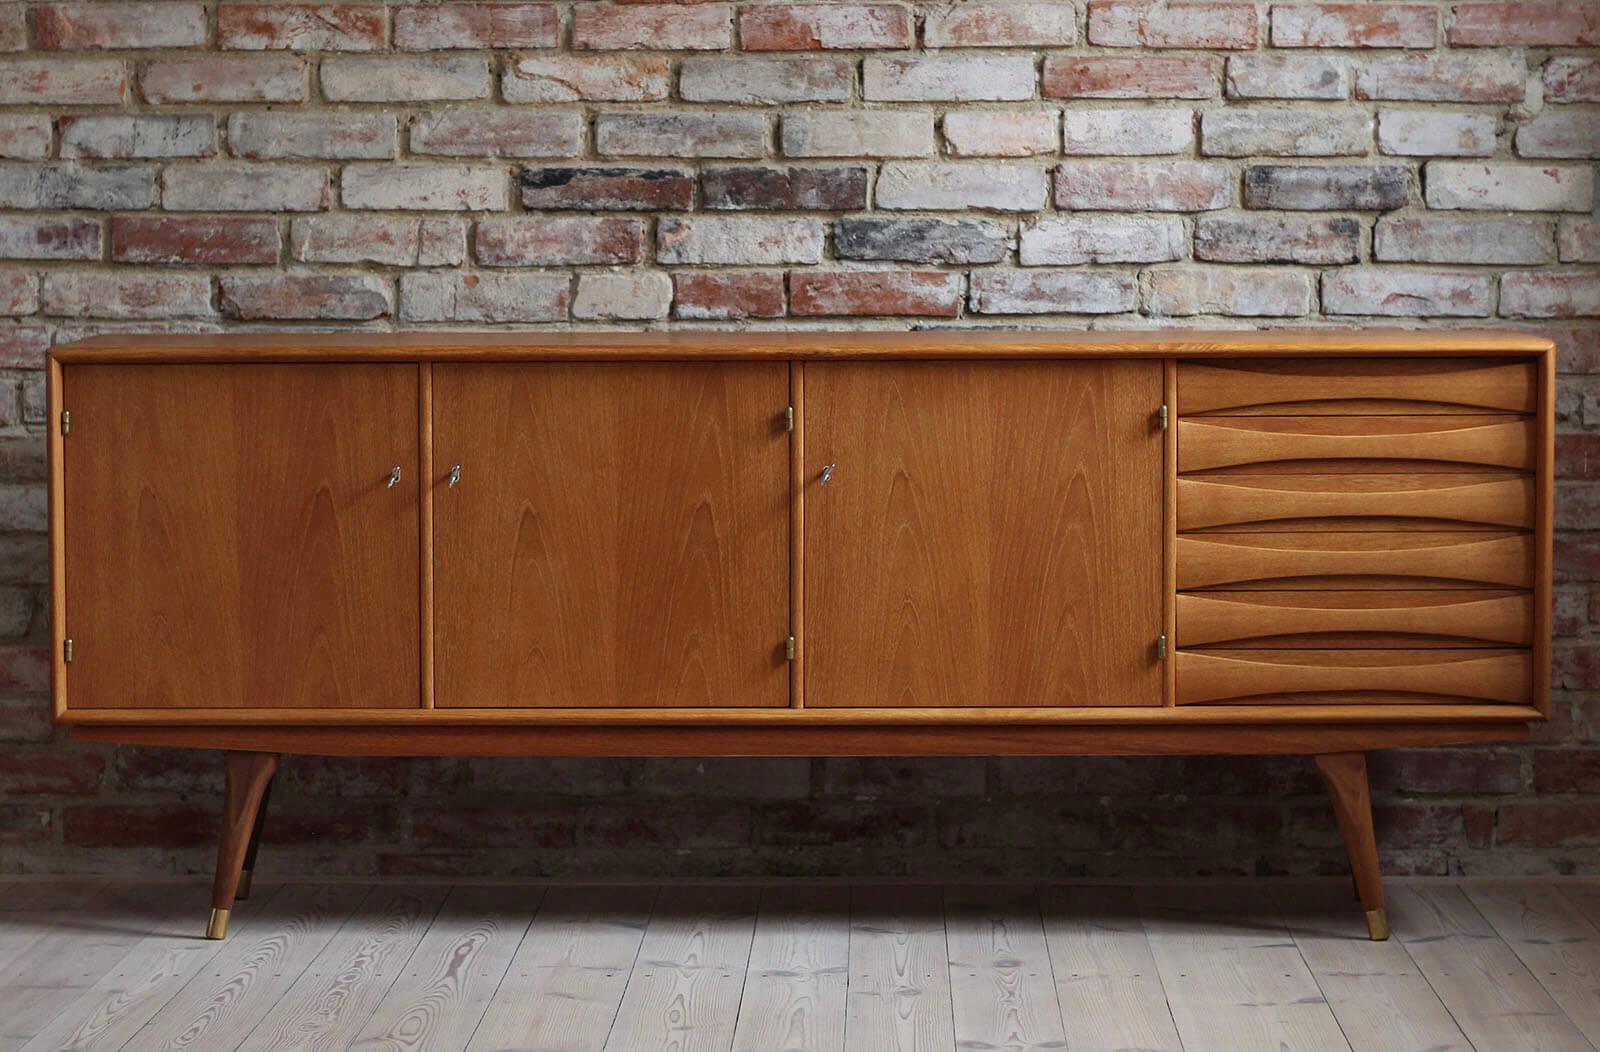 This beautiful teak sideboard was designed by Sven Andersen and manufactured in Norway in second half of the 1950s. The piece features three doors that reveal lots of storage space and six drawers in the section on the right. The sideboard features